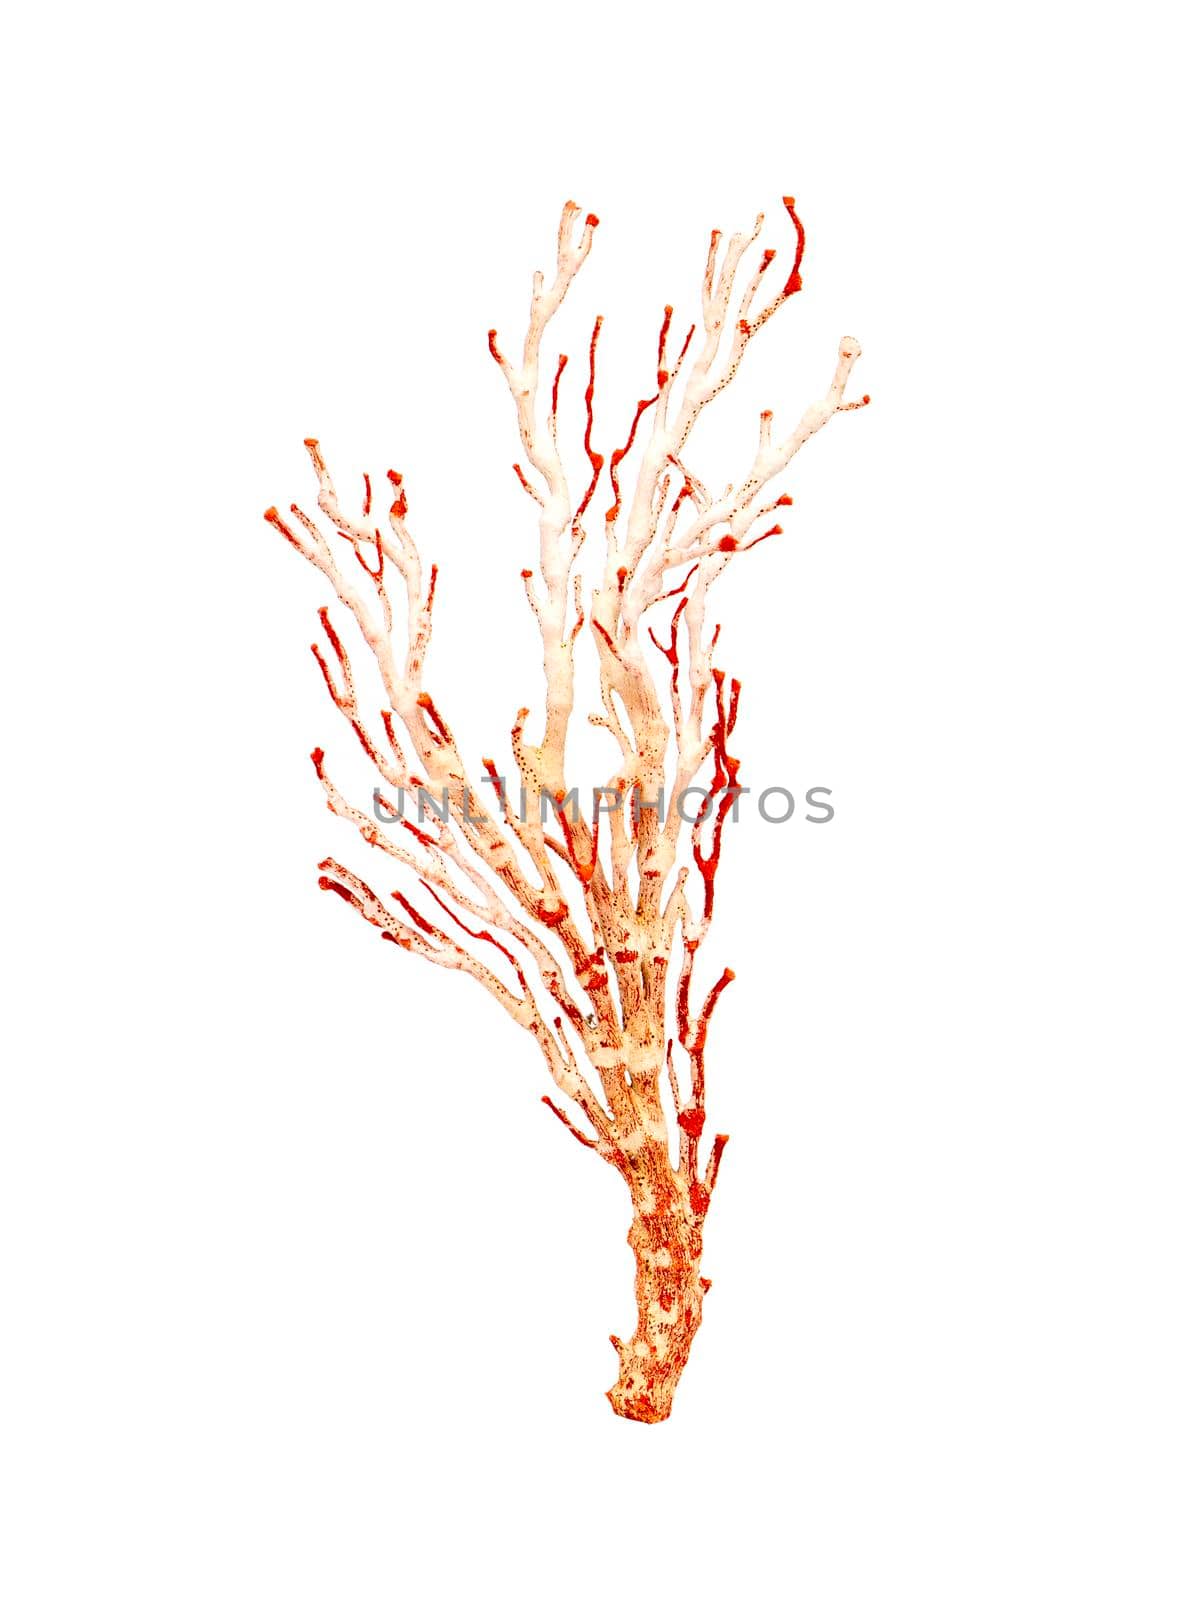 Image of dry natural coral or coralline isolated on white background. by yod67